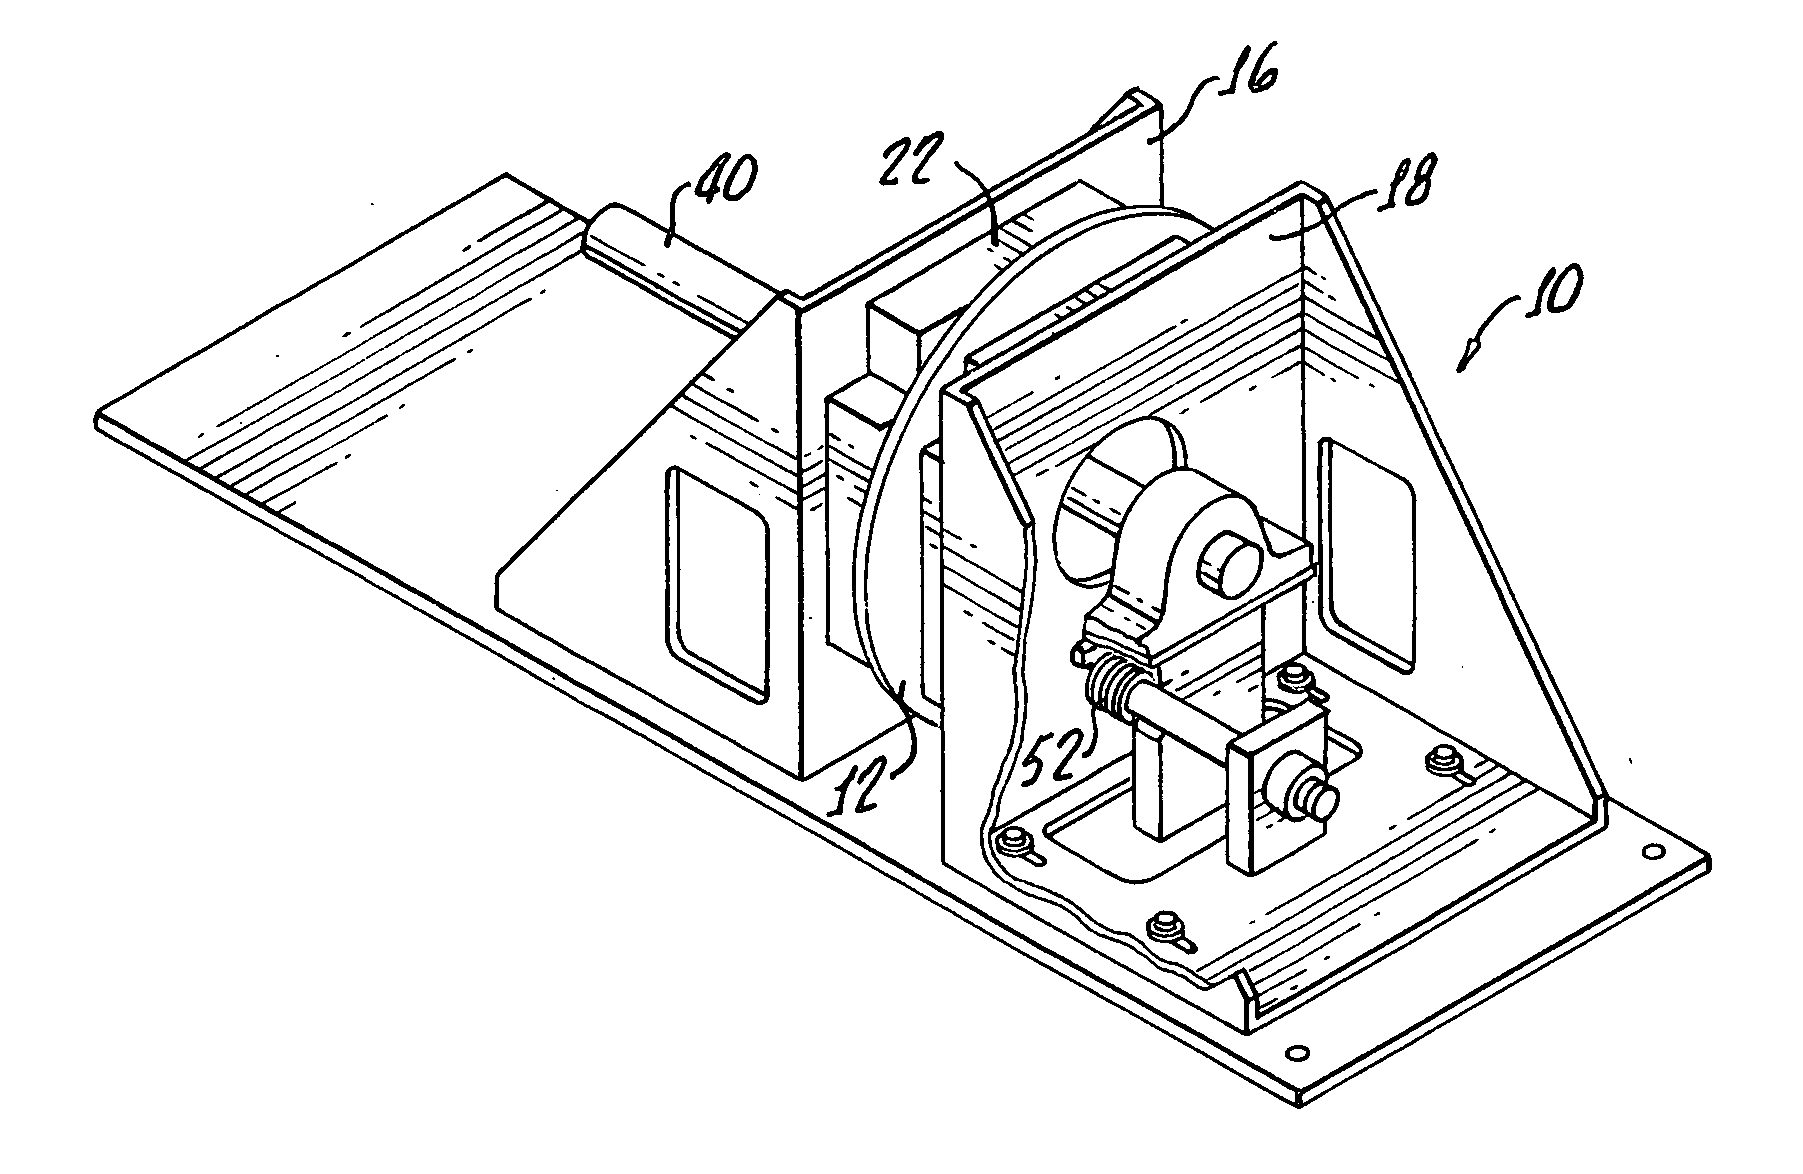 Axial rotary eddy current brake with self-adjustable braking force